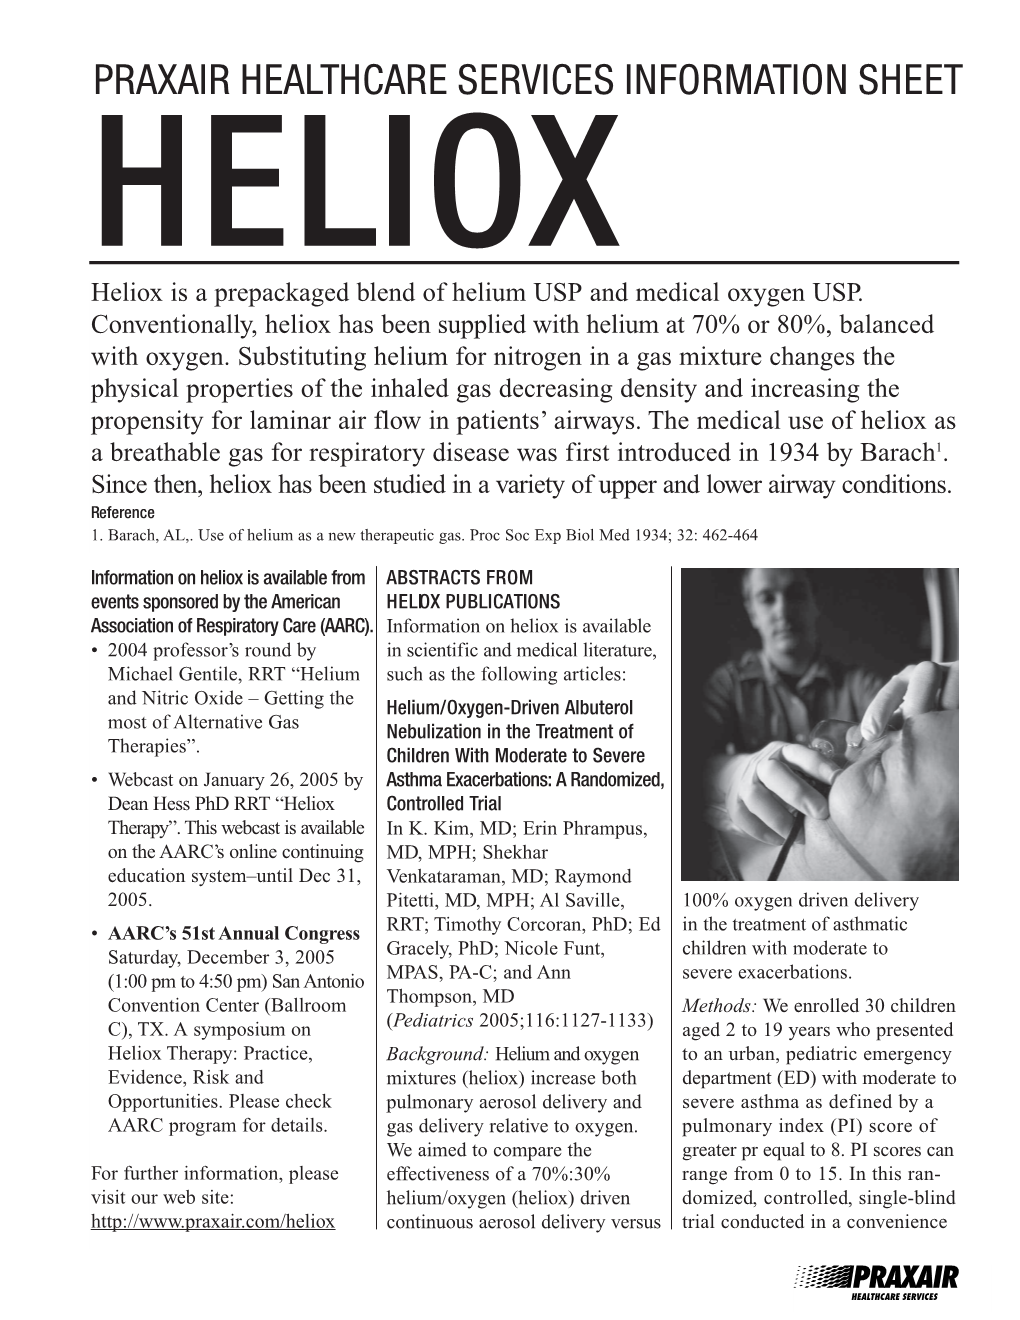 PRAXAIR HEALTHCARE SERVICES INFORMATION SHEET HELIOX Heliox Is a Prepackaged Blend of Helium USP and Medical Oxygen USP